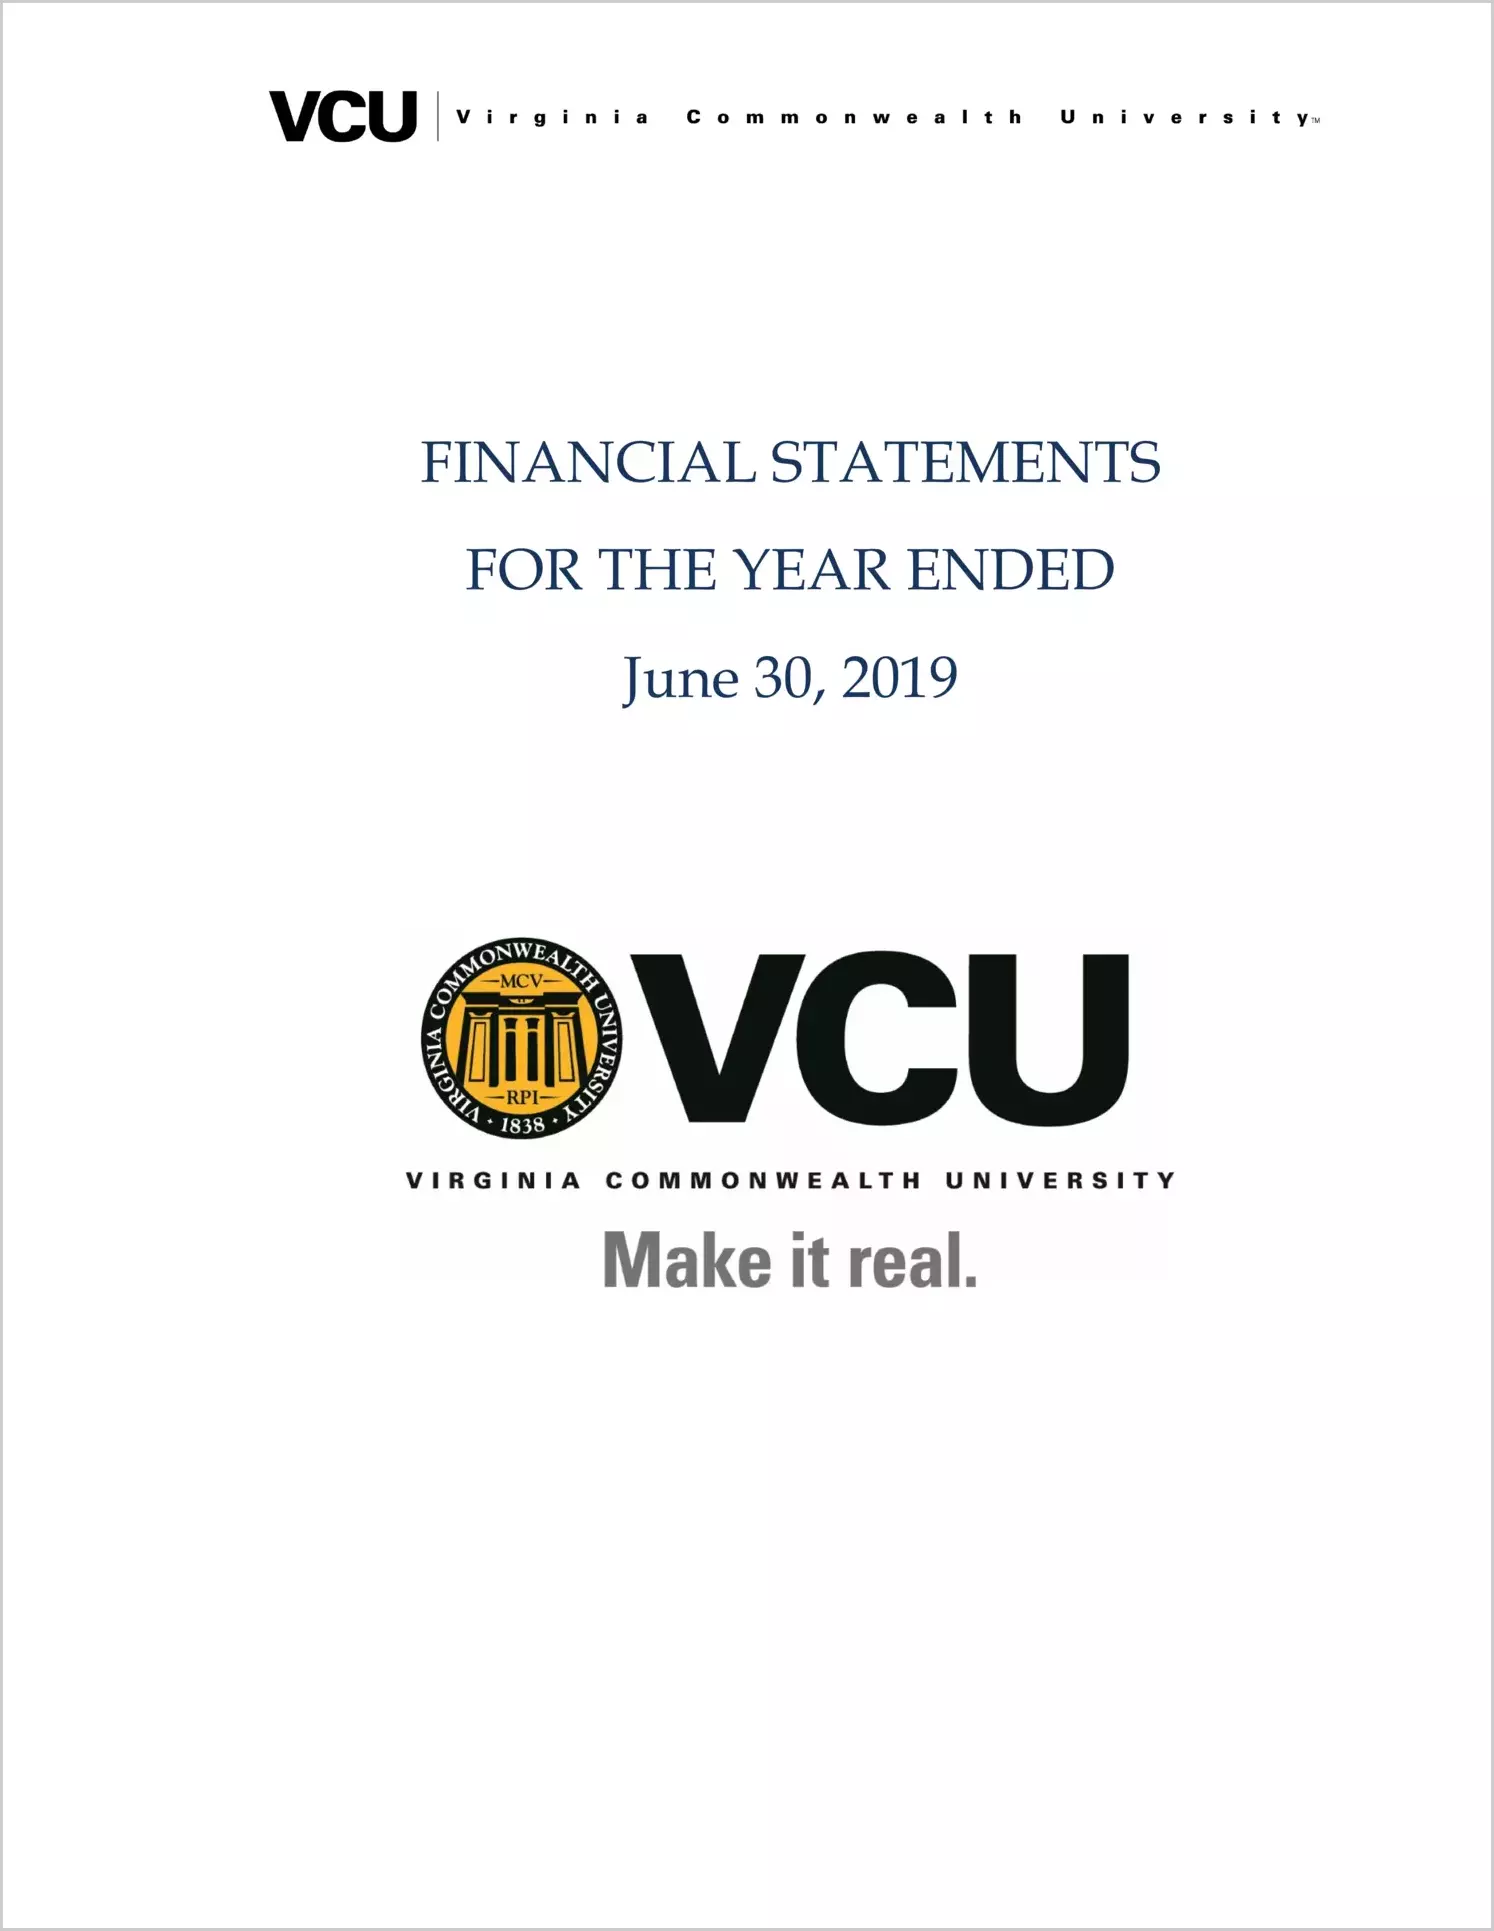 Virginia Commonwealth University Financial Statements for the year ended June 30, 2019